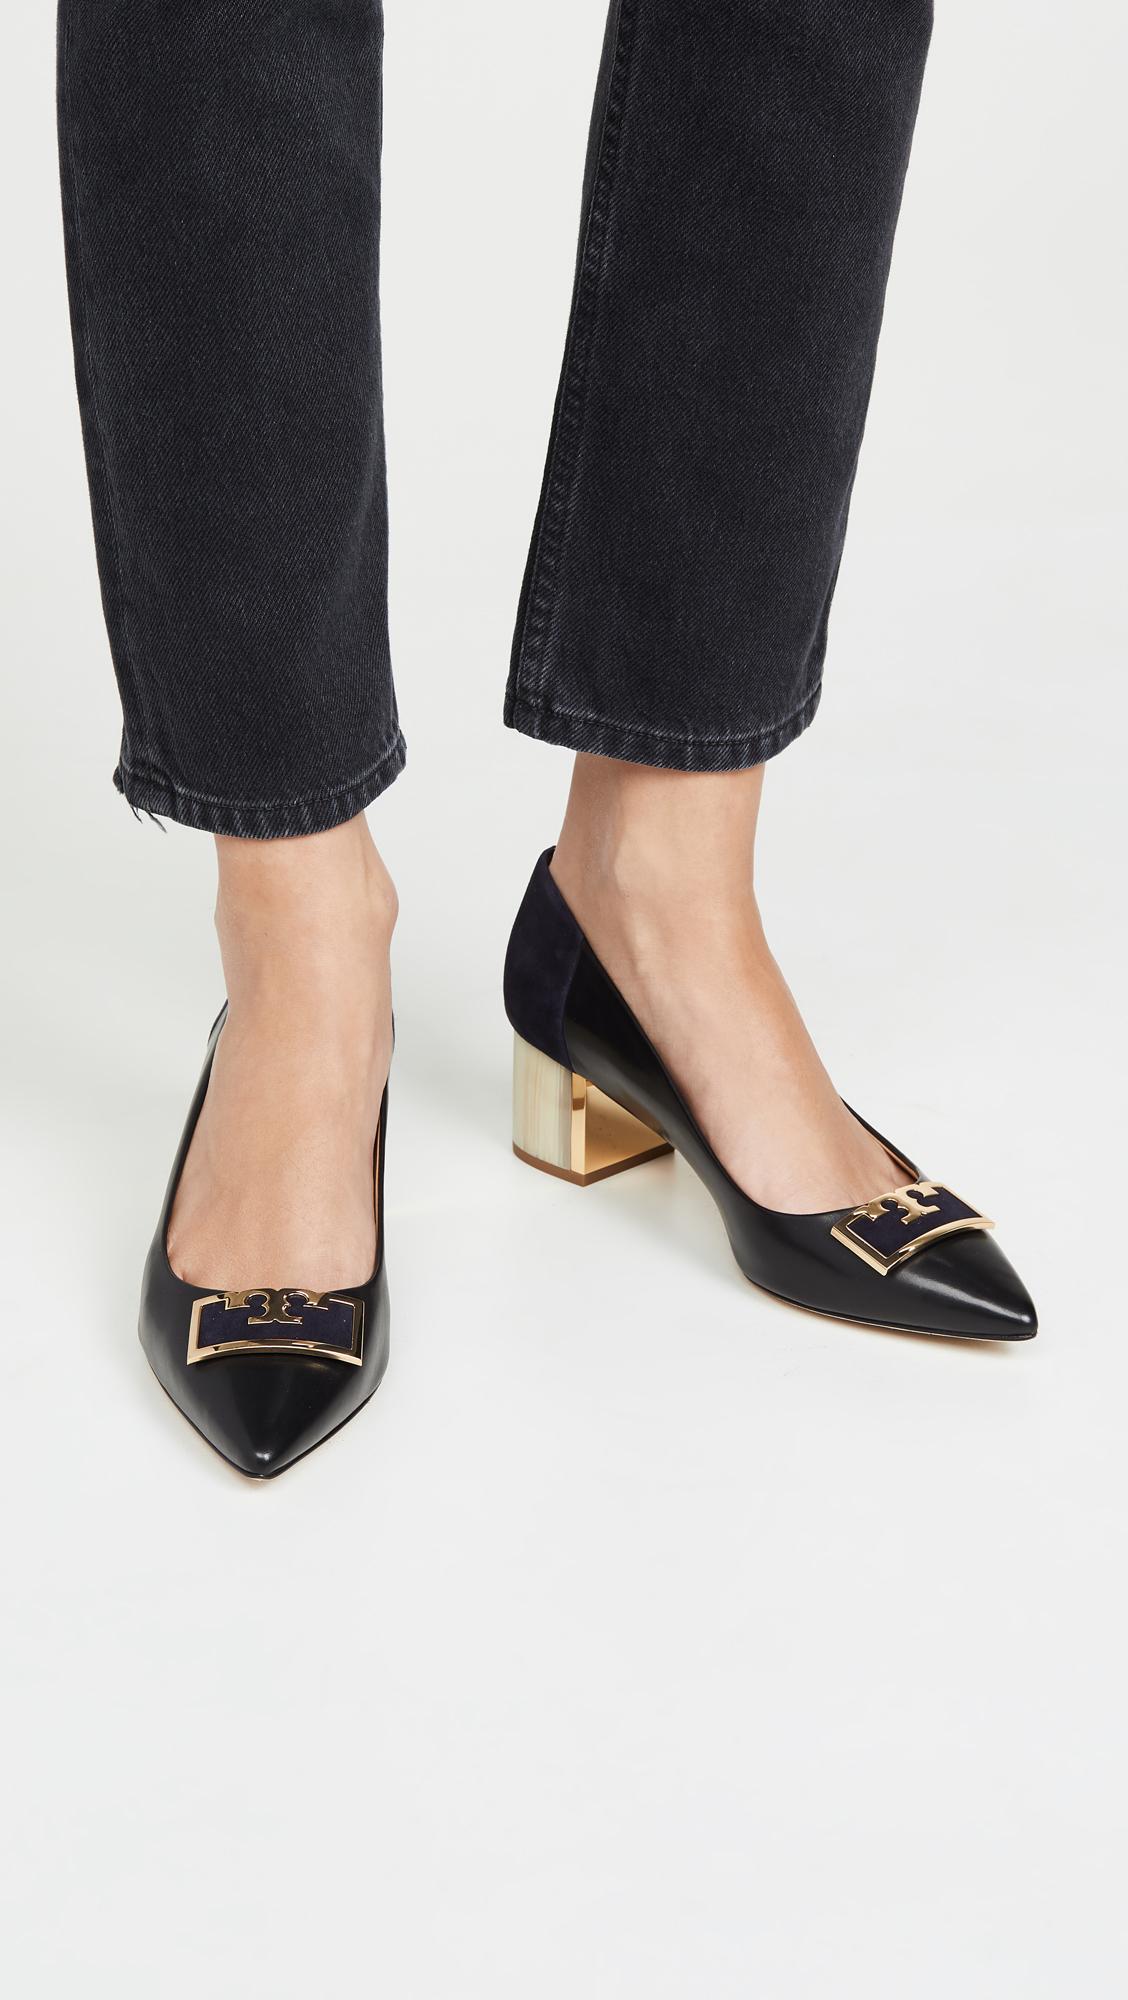 Tory Burch 55mm Pointy Toe Pumps in Black Lyst